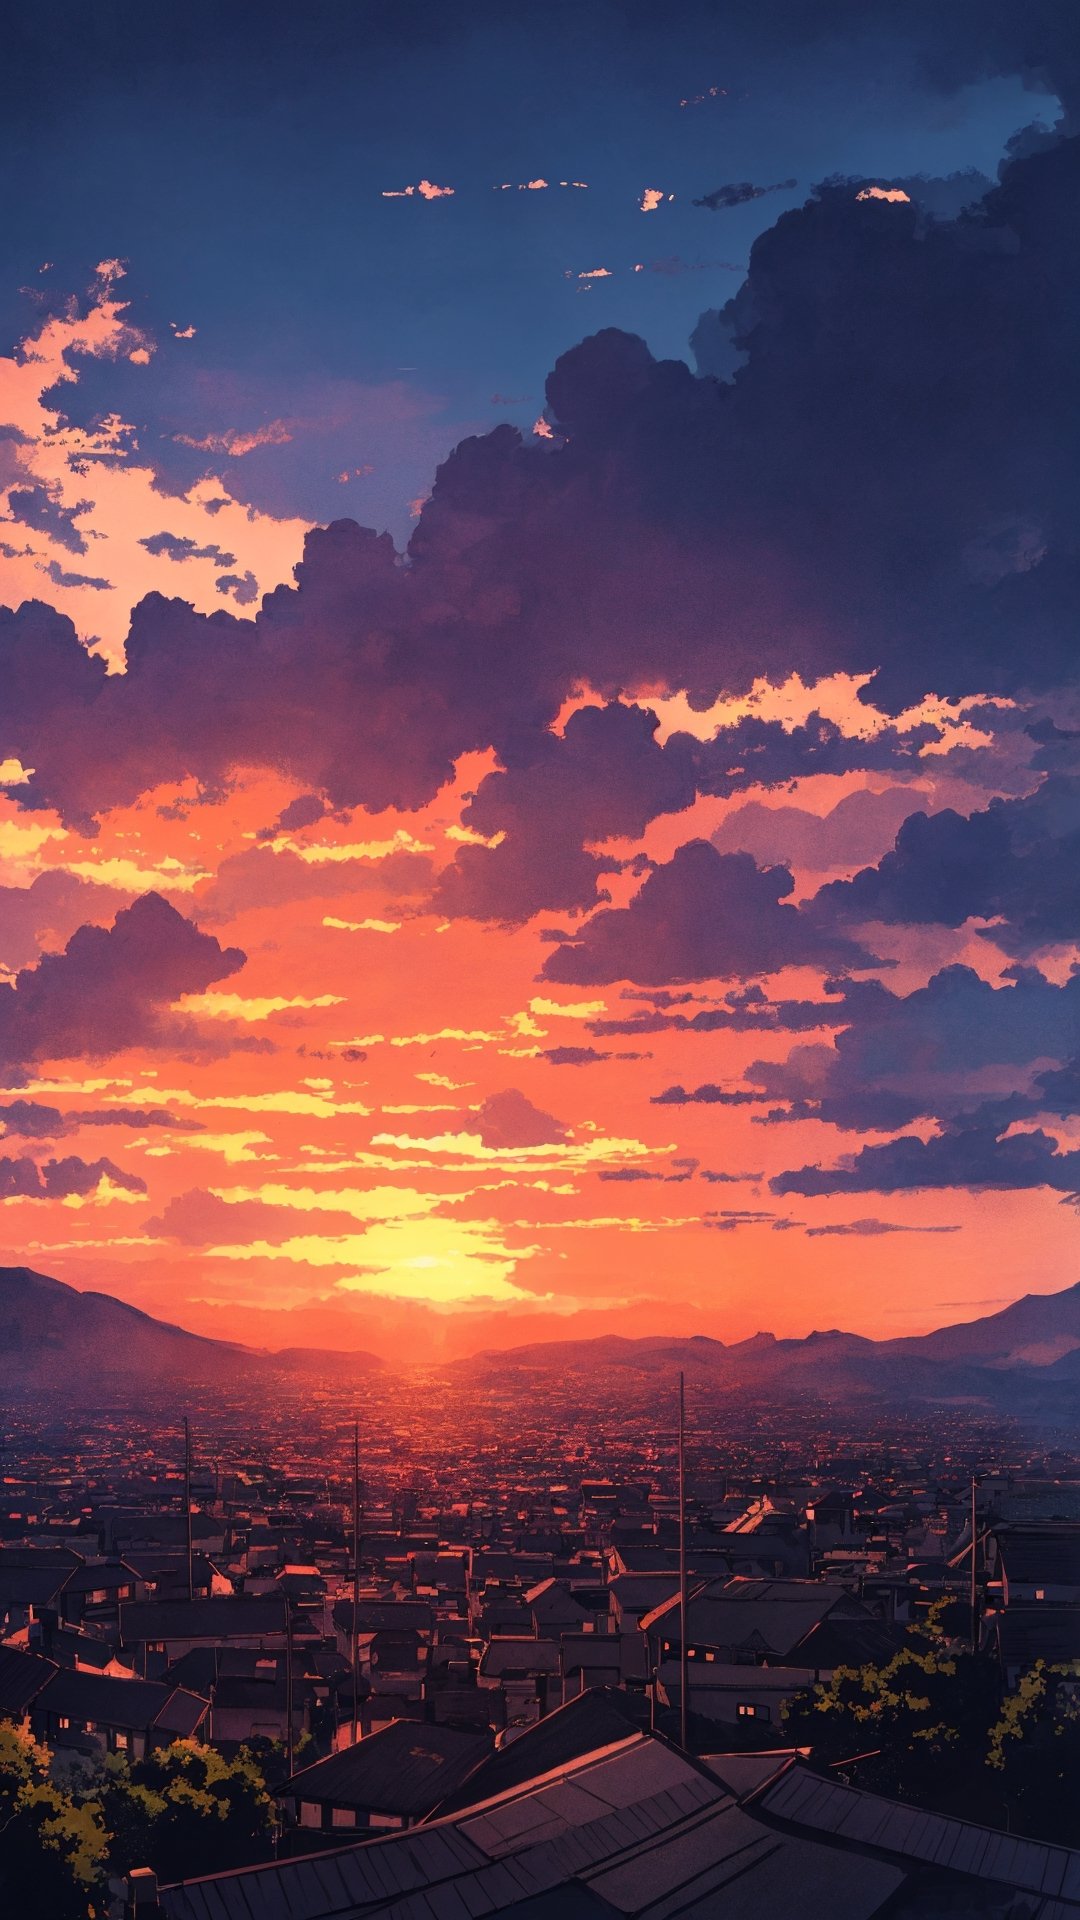 a calming and soothing anime scenery with cloudy sky, dawn time in a fores.

 4k, ultra hd, high quality, wide view, anime scenery, crispy detailed picture.